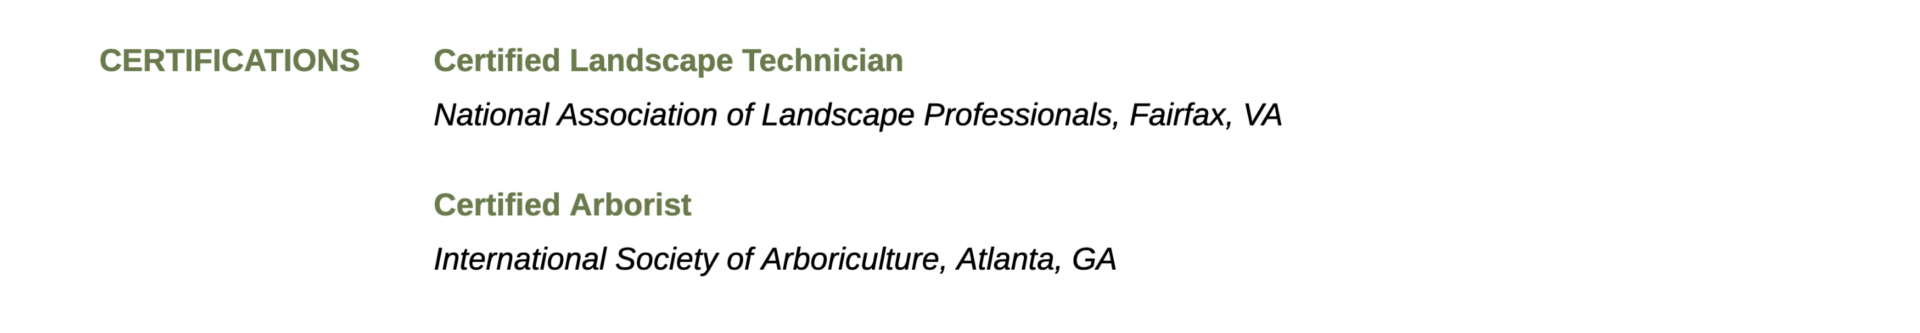 A certifications section from a landscaping resume listing two certifications. 